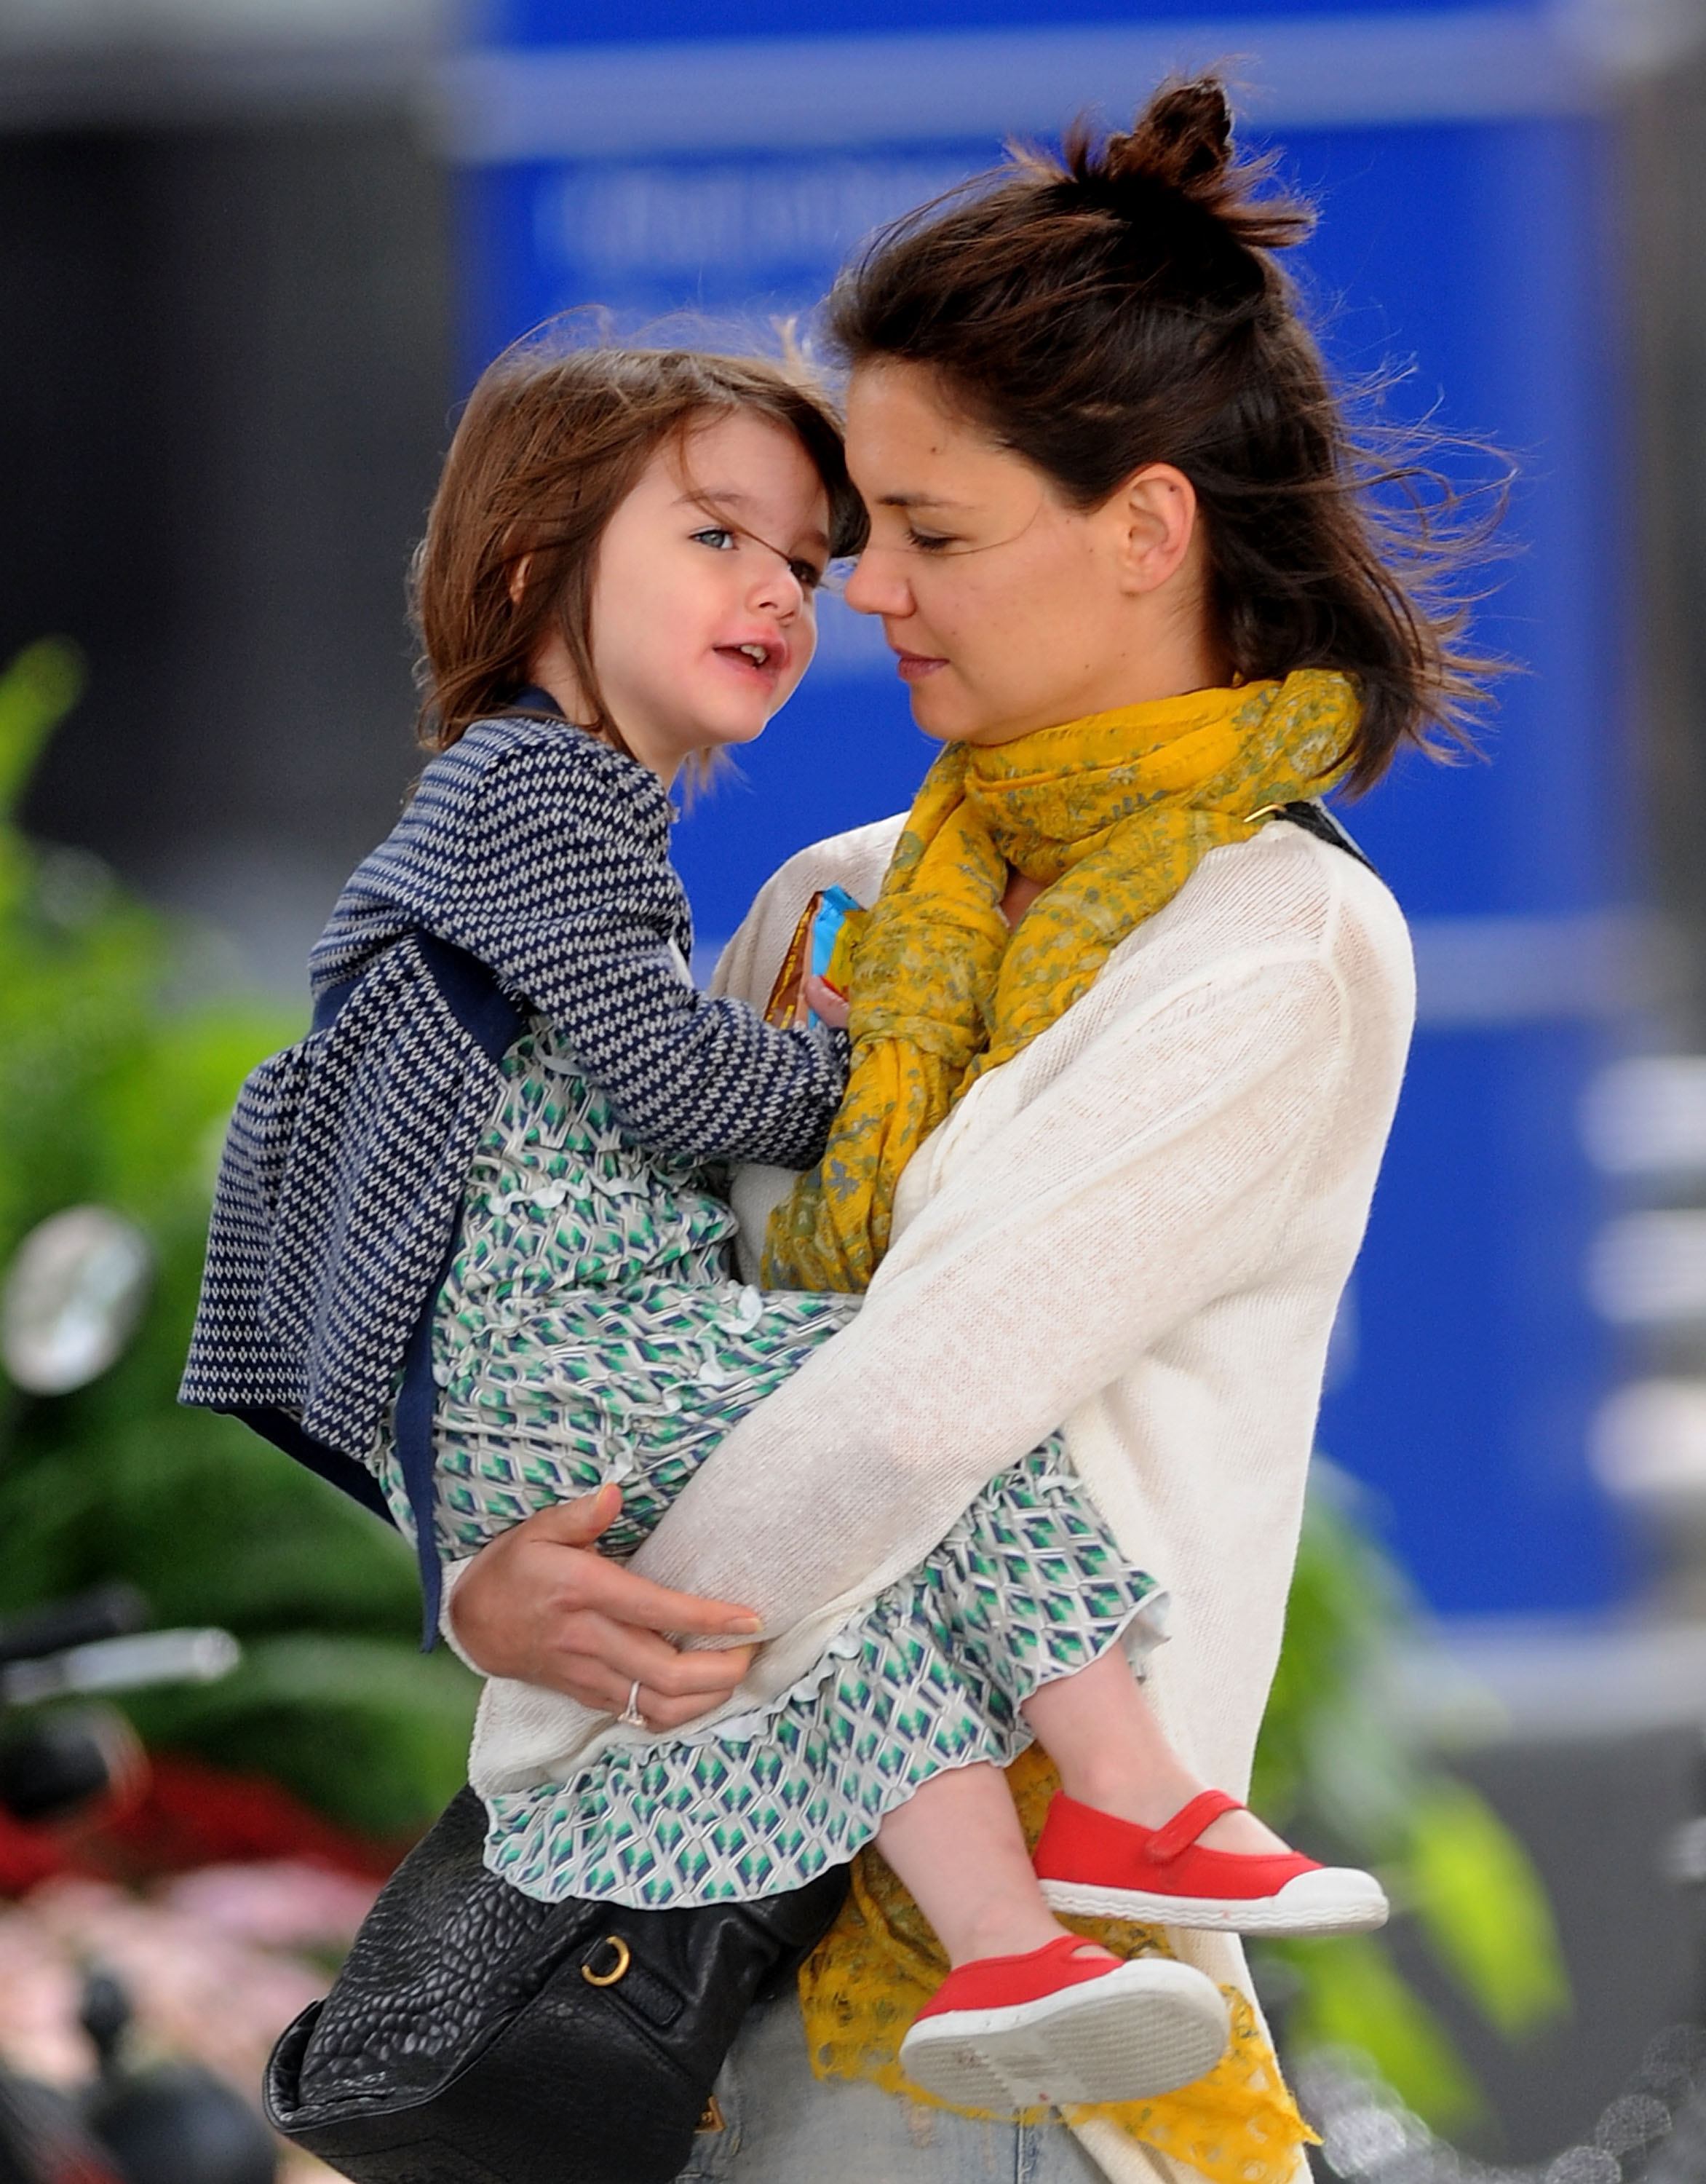 Katie Holmes and her daughter Suri in Boston in 2009 | Source: Getty Images